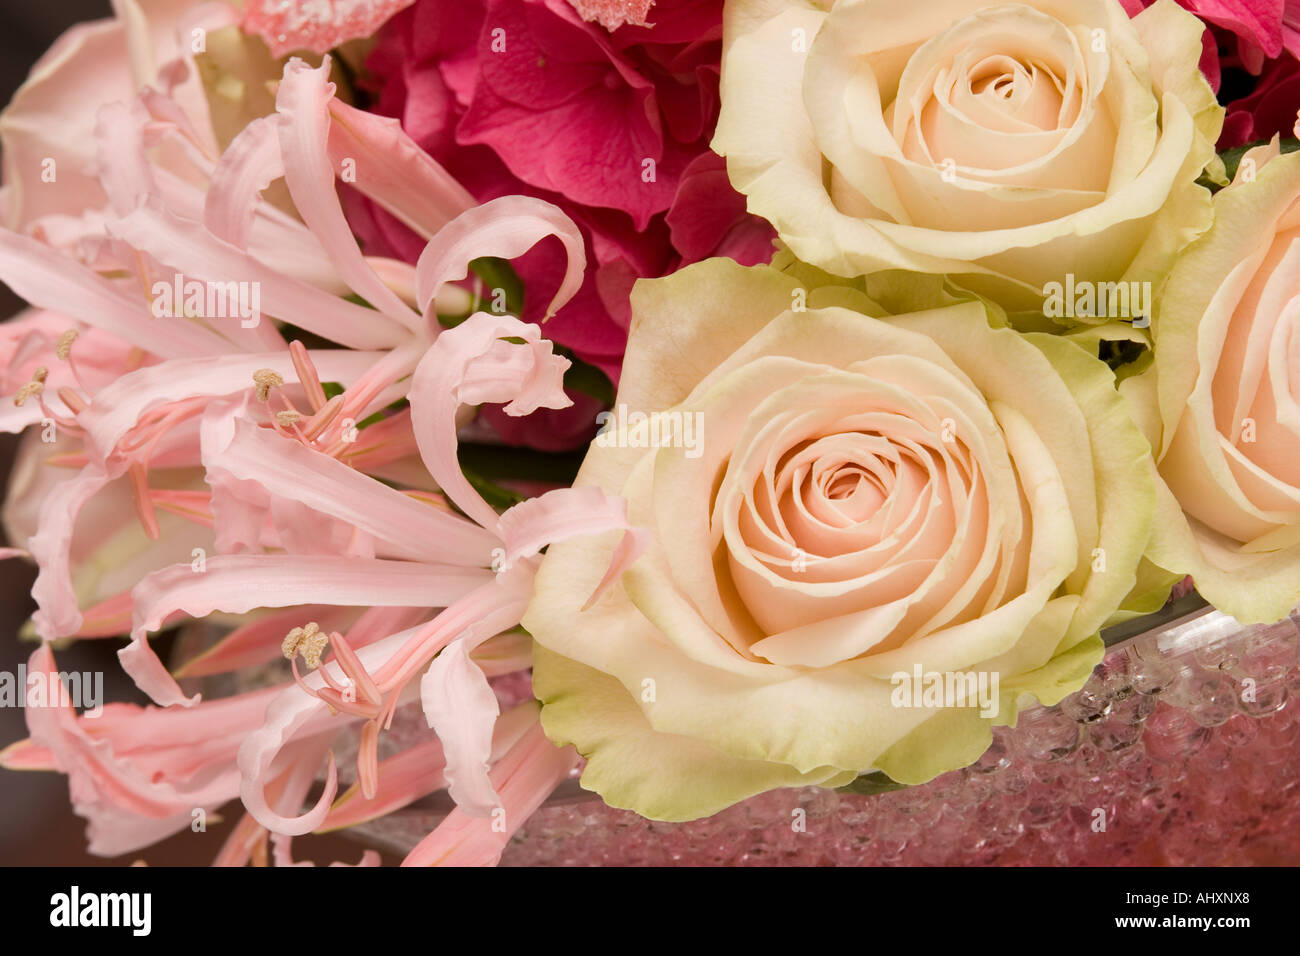 weddings floral arrangement of roses hydrangea and nerine lilly Stock Photo